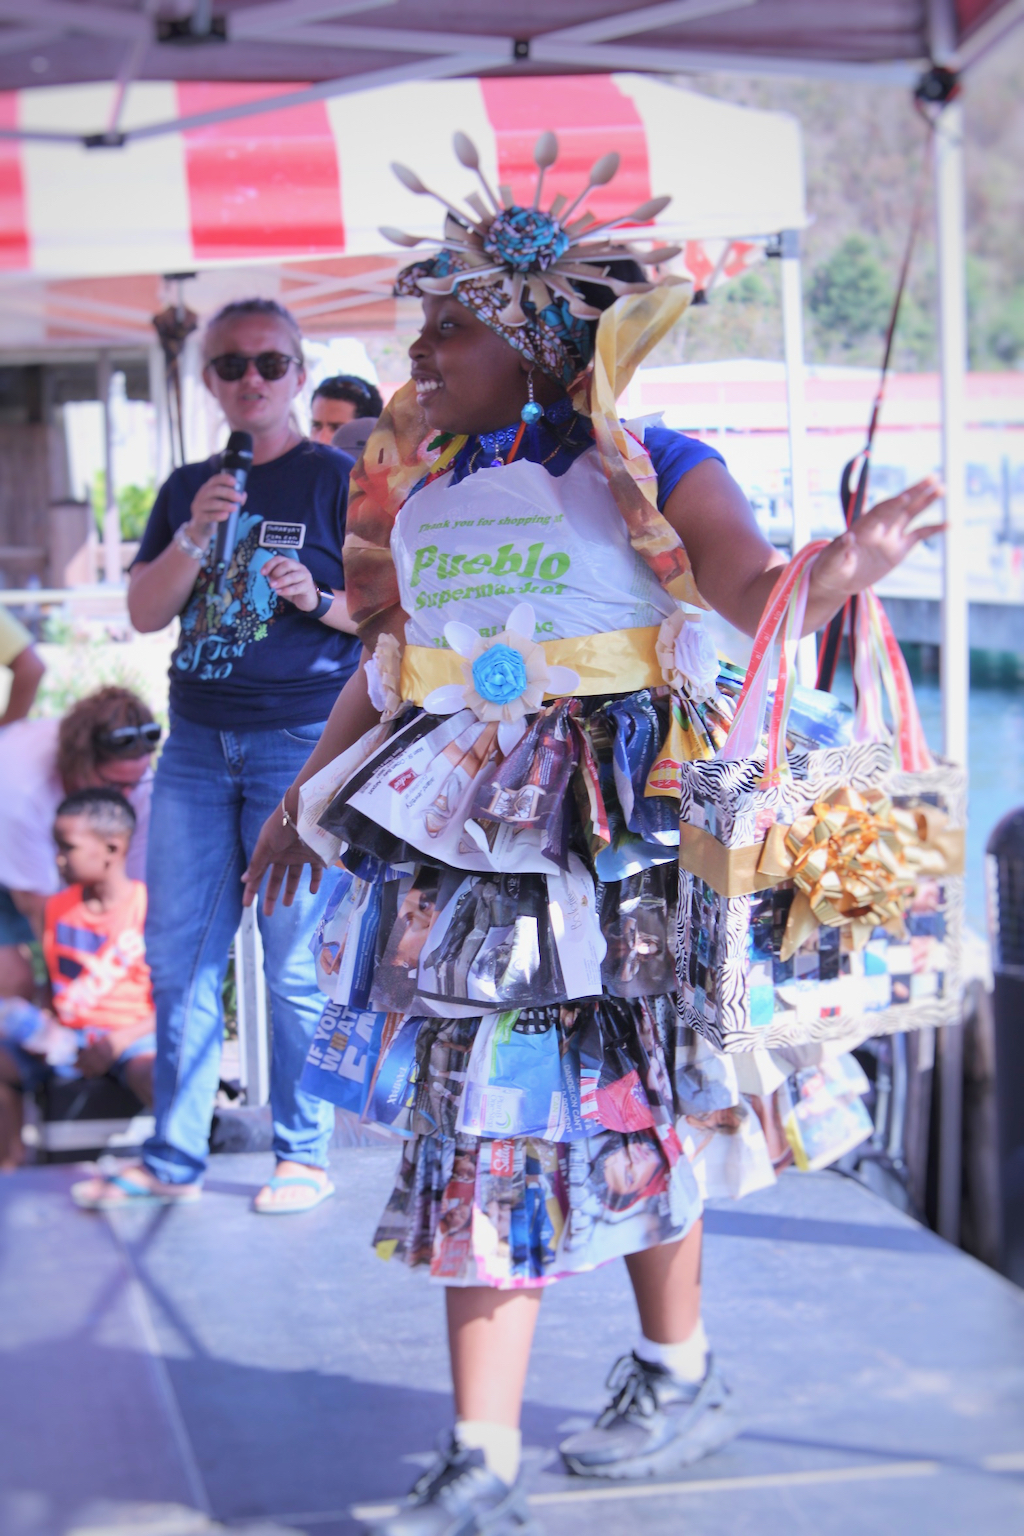 Wearing a ruffled dress made of magazines, newspapers and grocery bags, Kelyssa Kelley, graced the stage of the Trashion Show with a smile and panache. The 9-year-old represented Lockhart Elementary School and completed her outfit with a handbag and full head piece made from recycled materials.